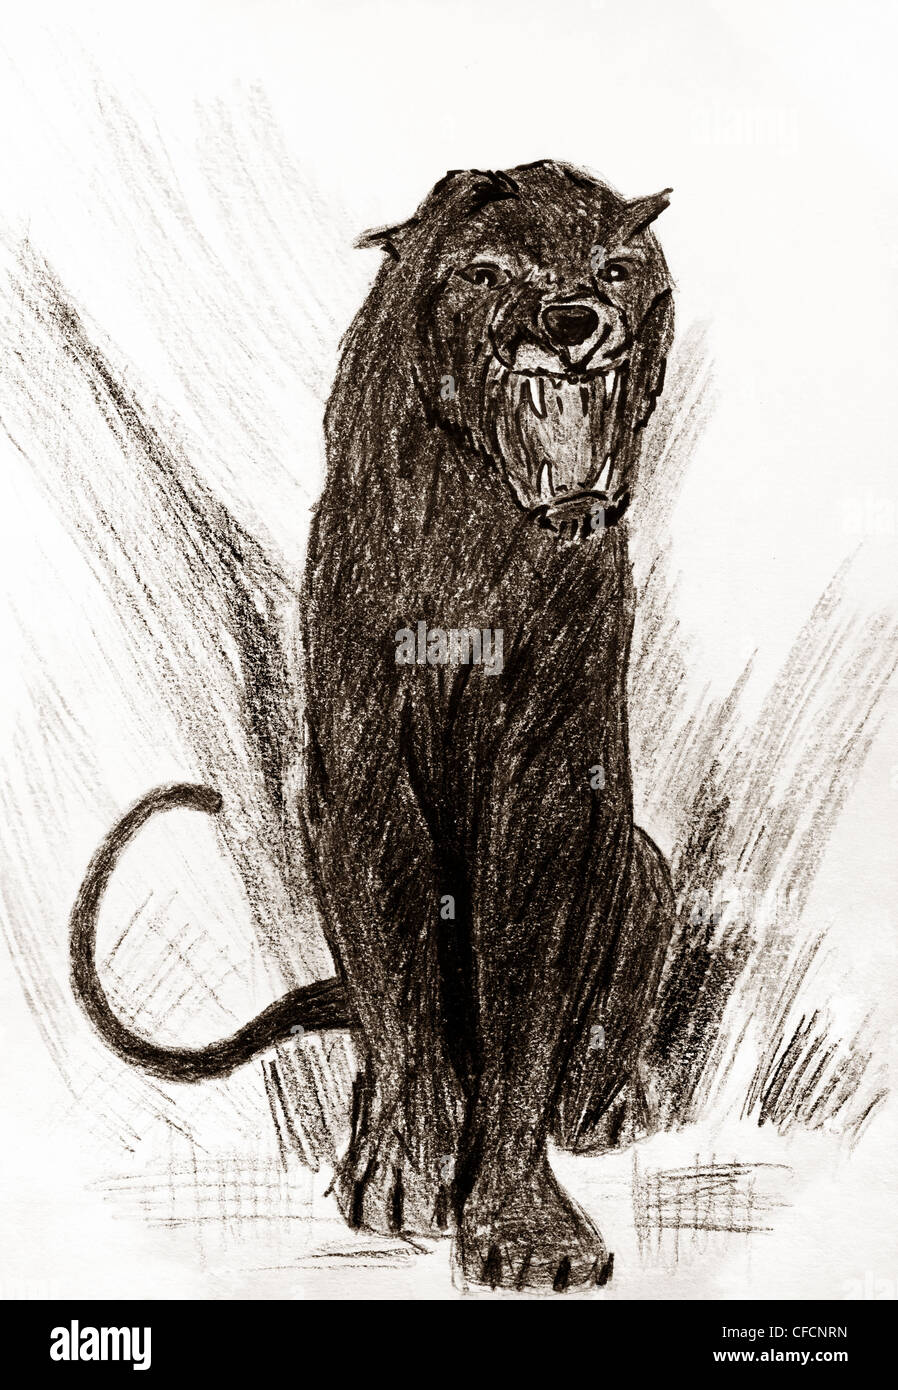 Child painting of a black puma or panther roaring Stock Photo